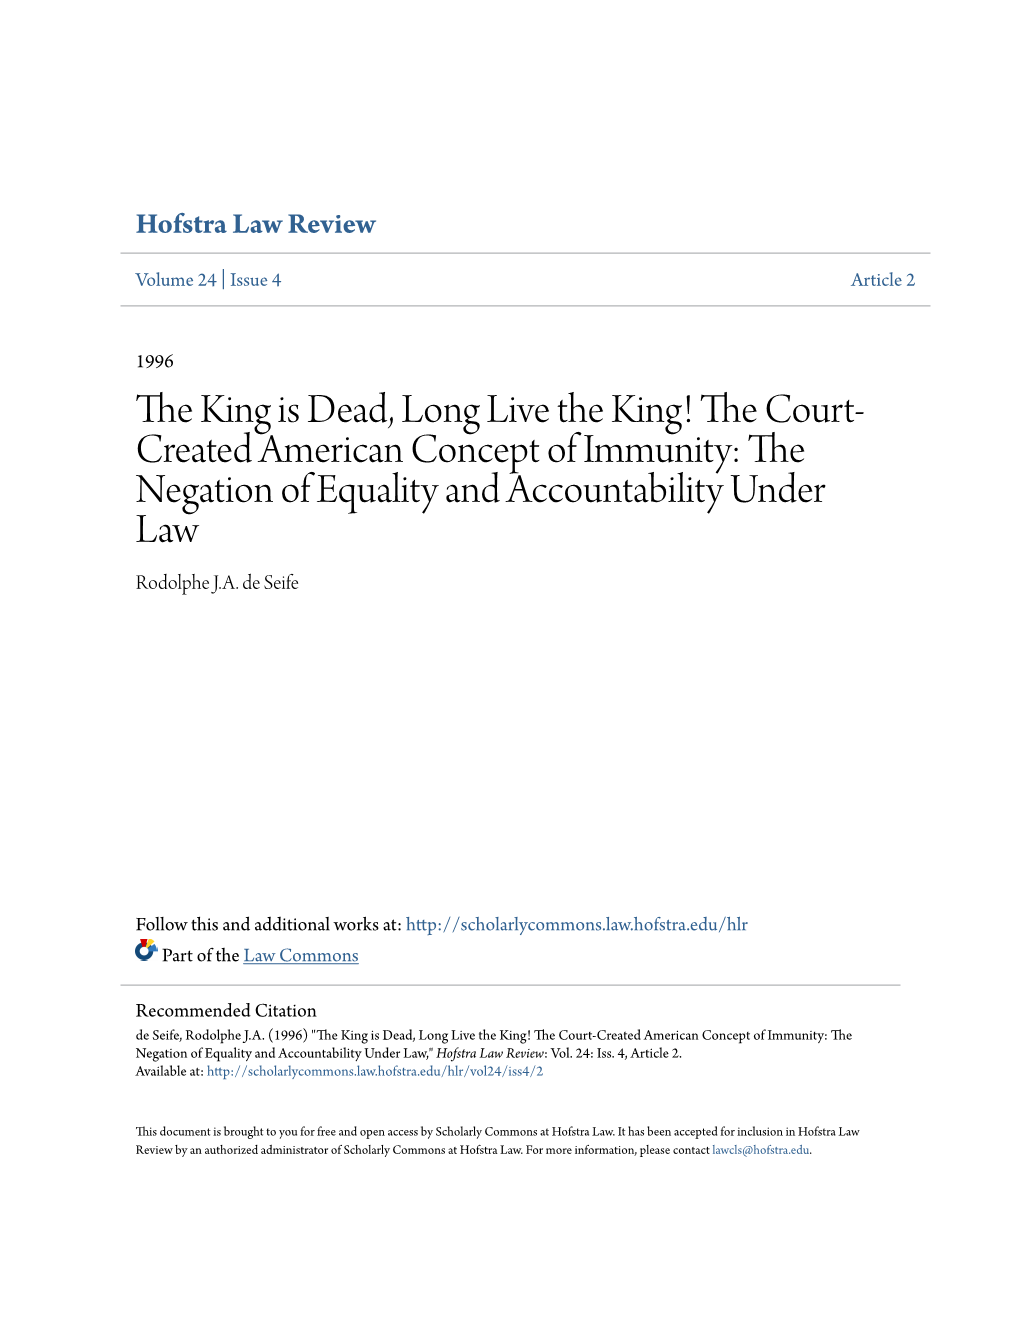 The Court-Created American Concept of Immunity: the Negation of Equality and Accountability Under Law